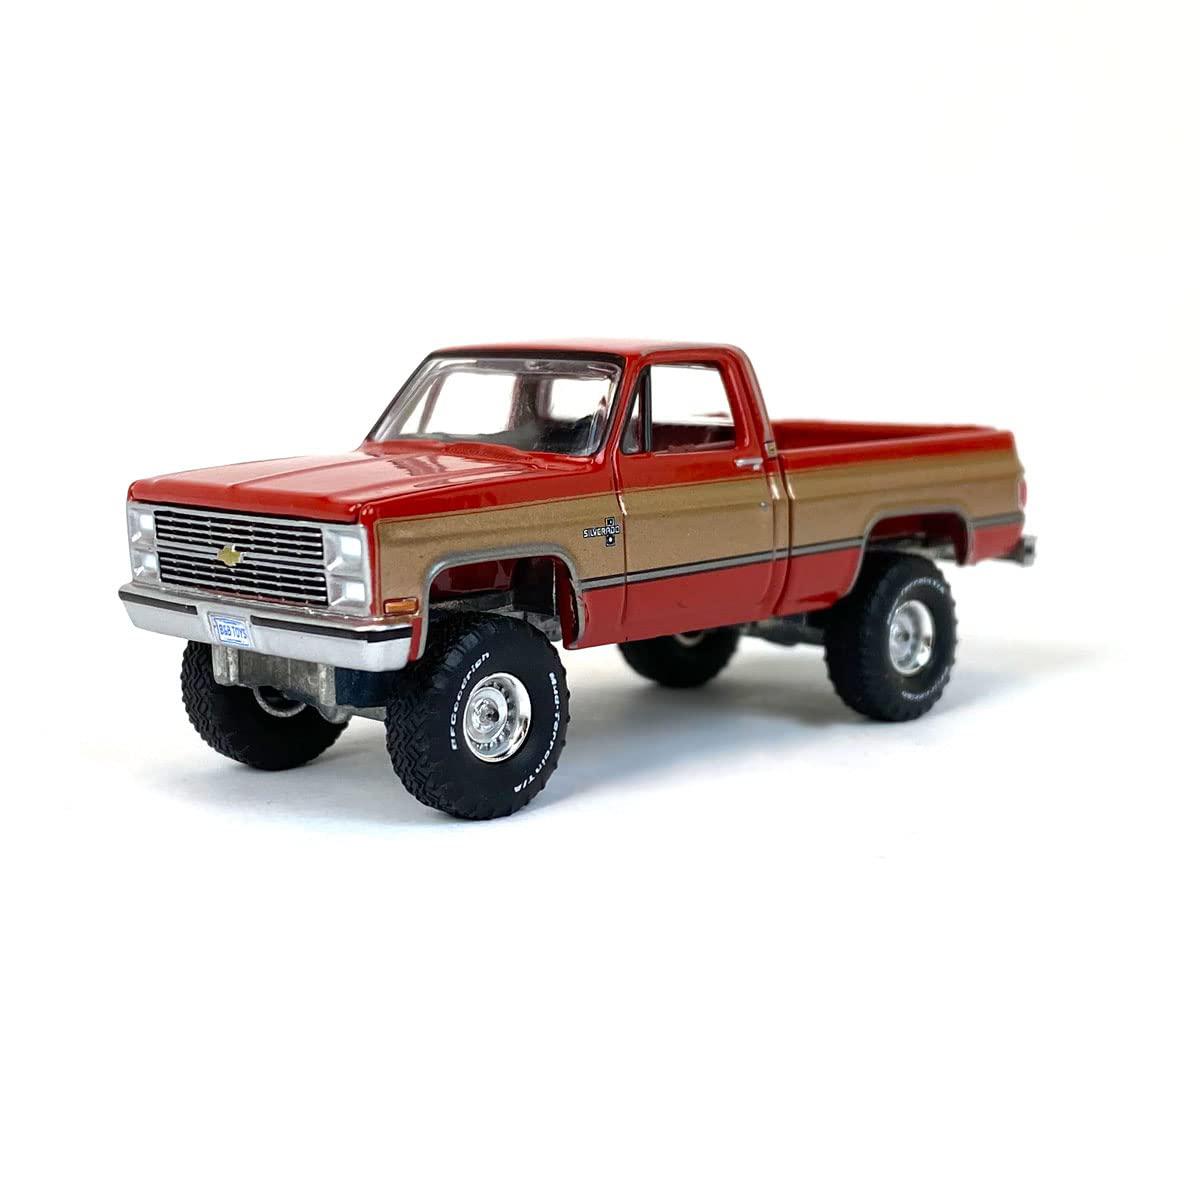 truck 1/64 1983 chevy k10 4x4, red/gold, exclusive limited edition cp7805